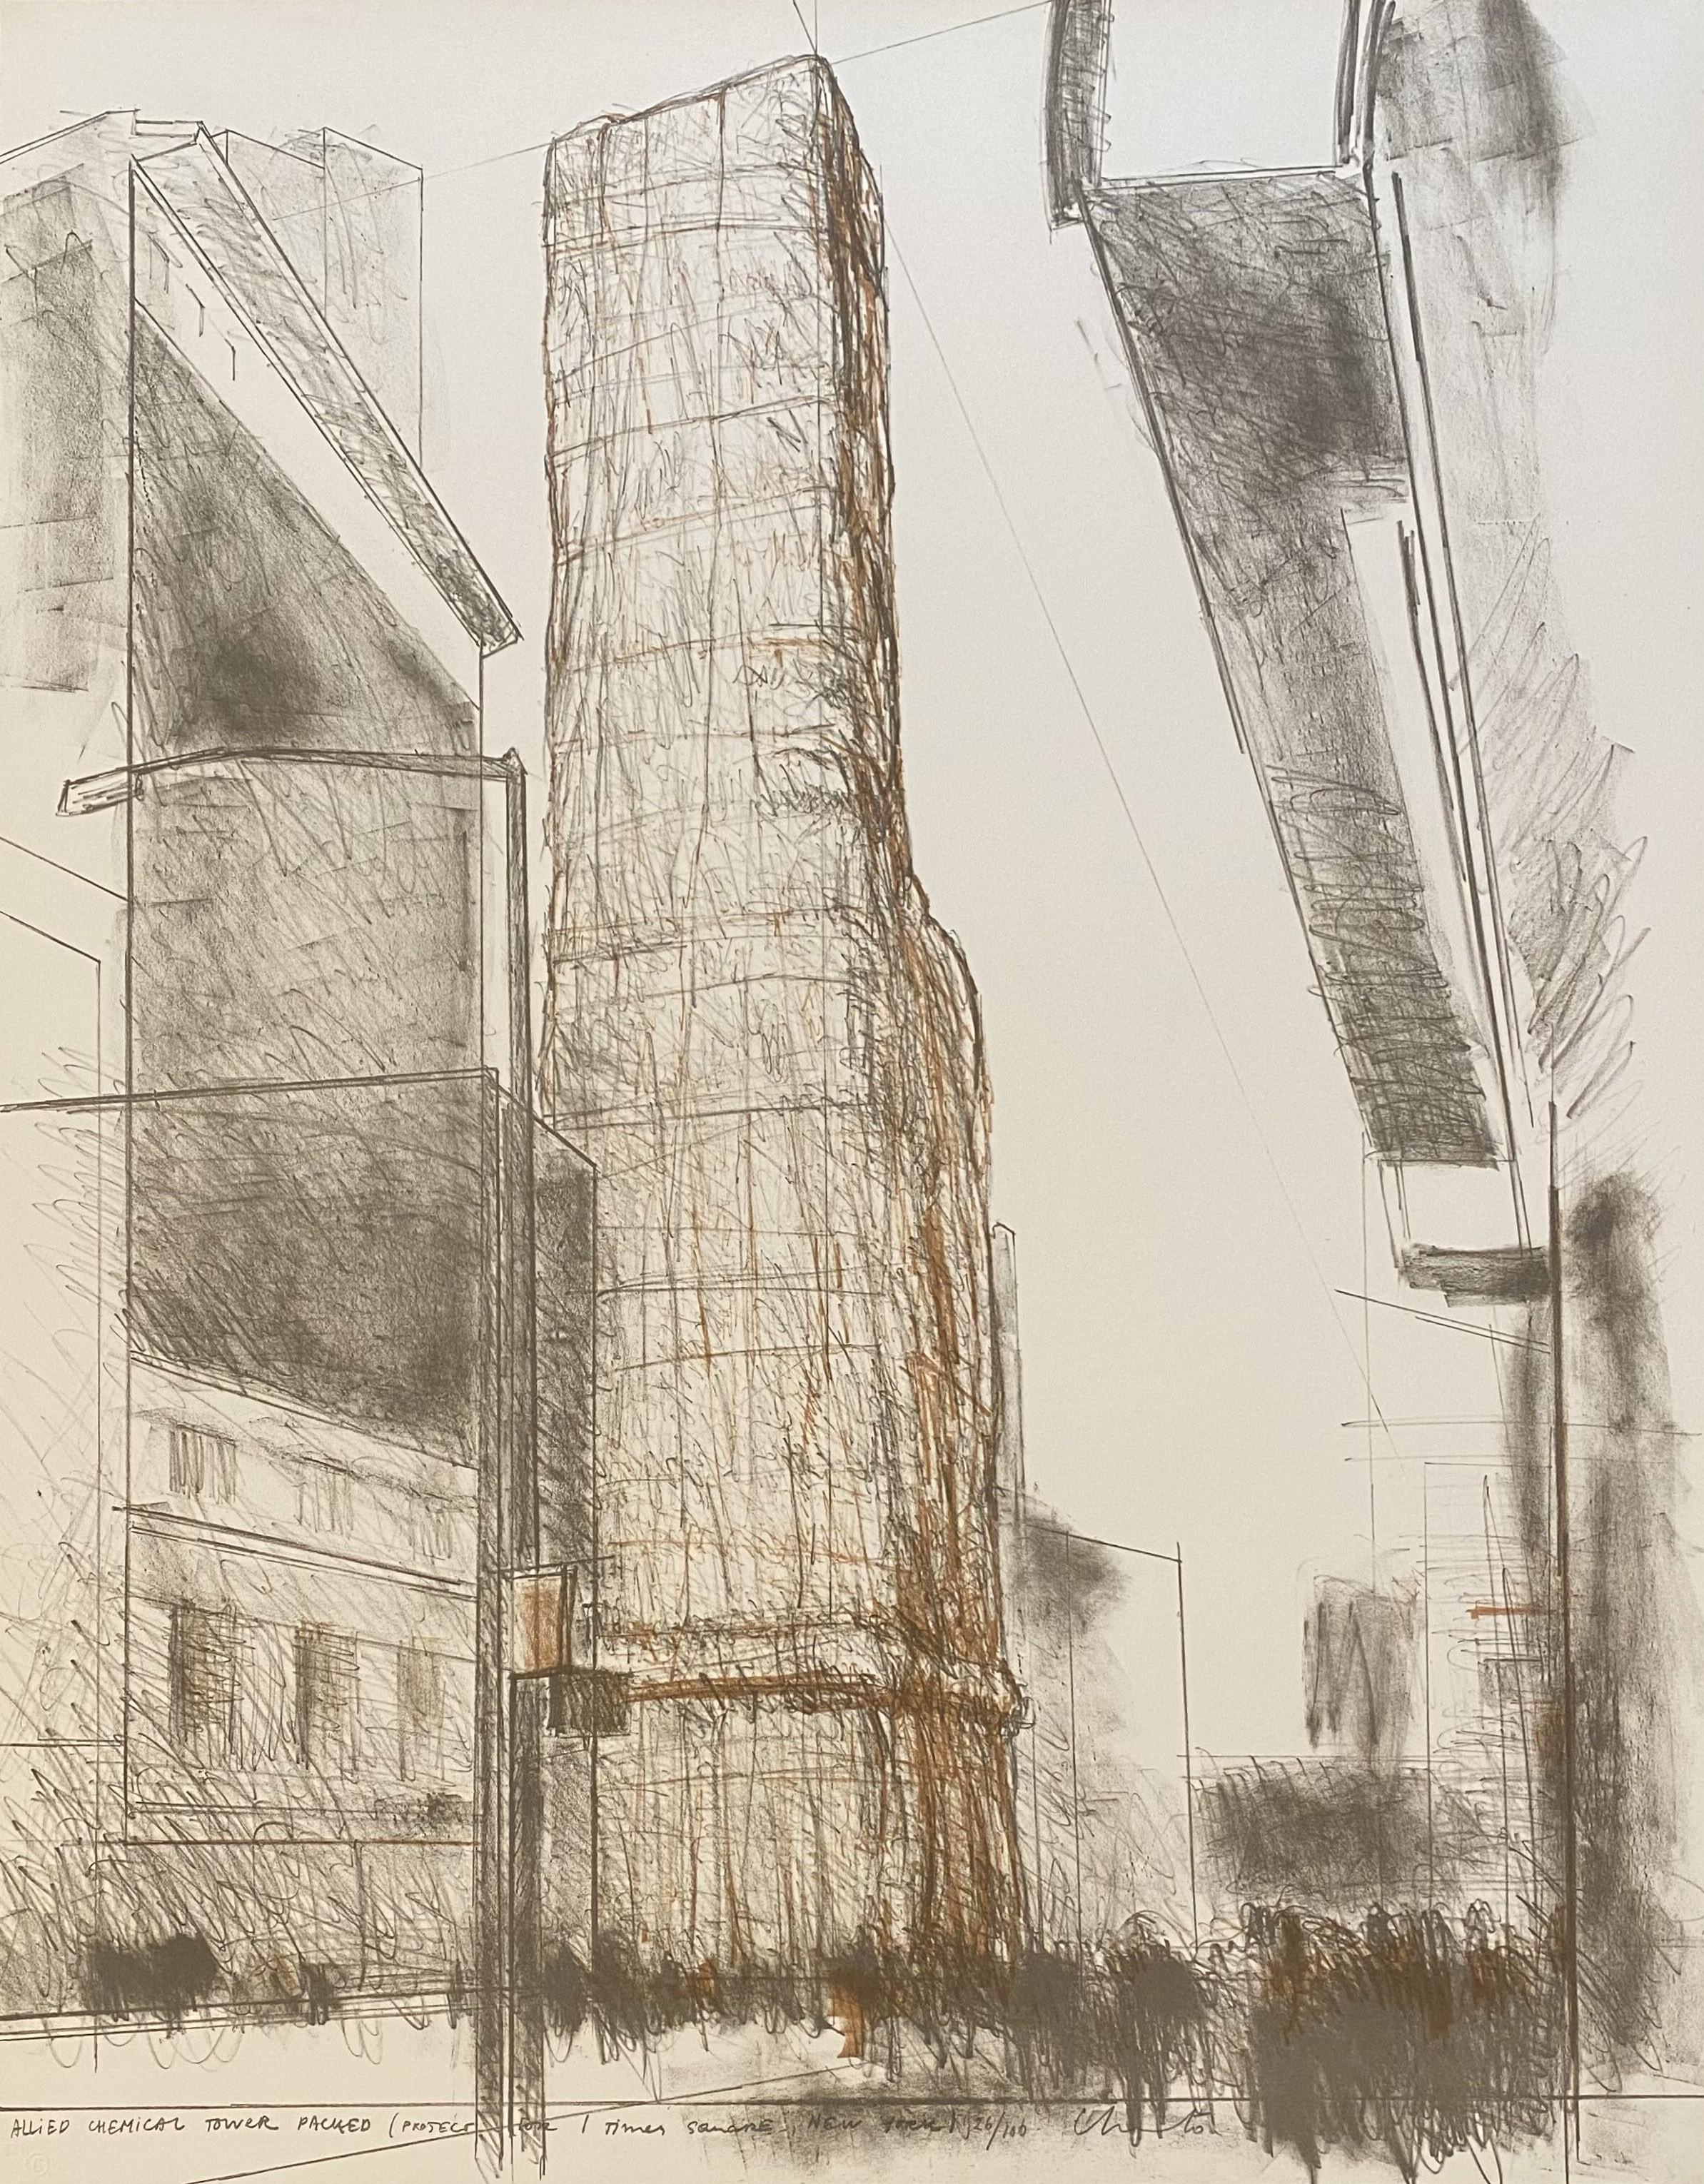 Christo and Jeanne-Claude Landscape Print - Allied Chemical Tower Packed (Project for One Times Square, New York)